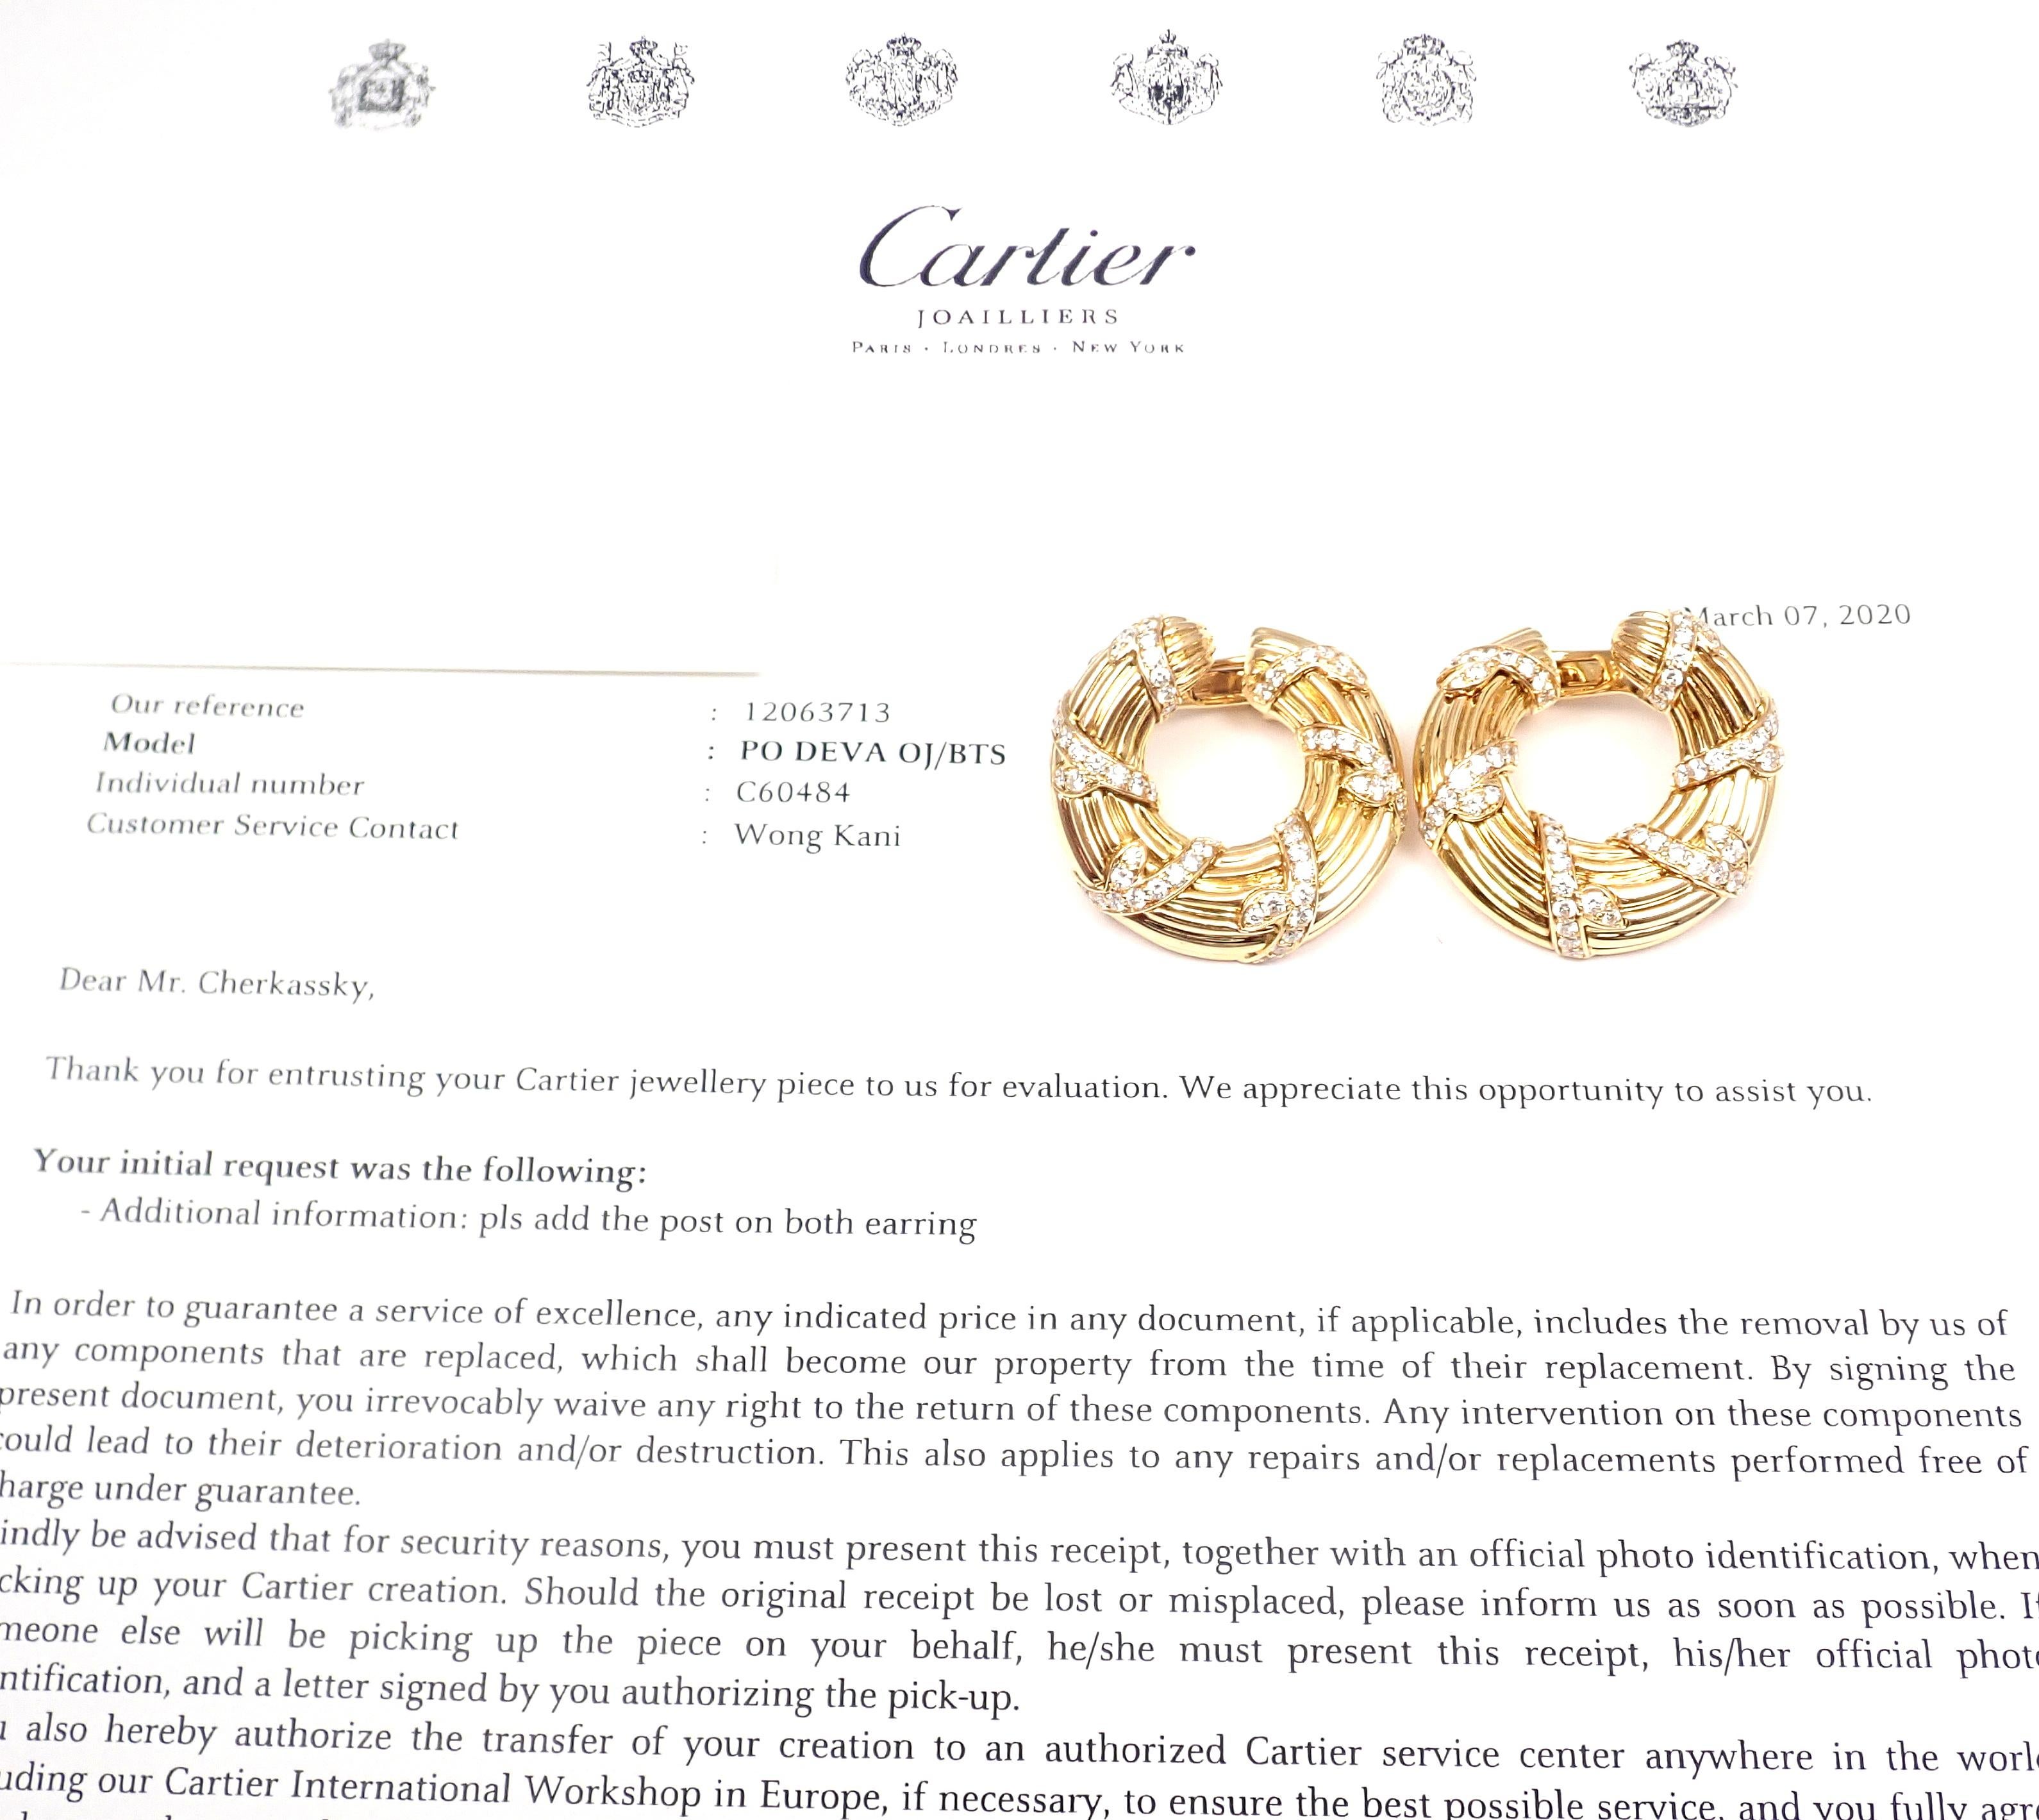 18k Yellow Gold Diamond Hoop Earrings by Cartier. 
With 100 round brilliant cut diamonds VVS1 clarity, E color total weight approximately 2.5ct
Earrings are made for pierced ears.
These earrings come with service paper from Cartier store in NYC and